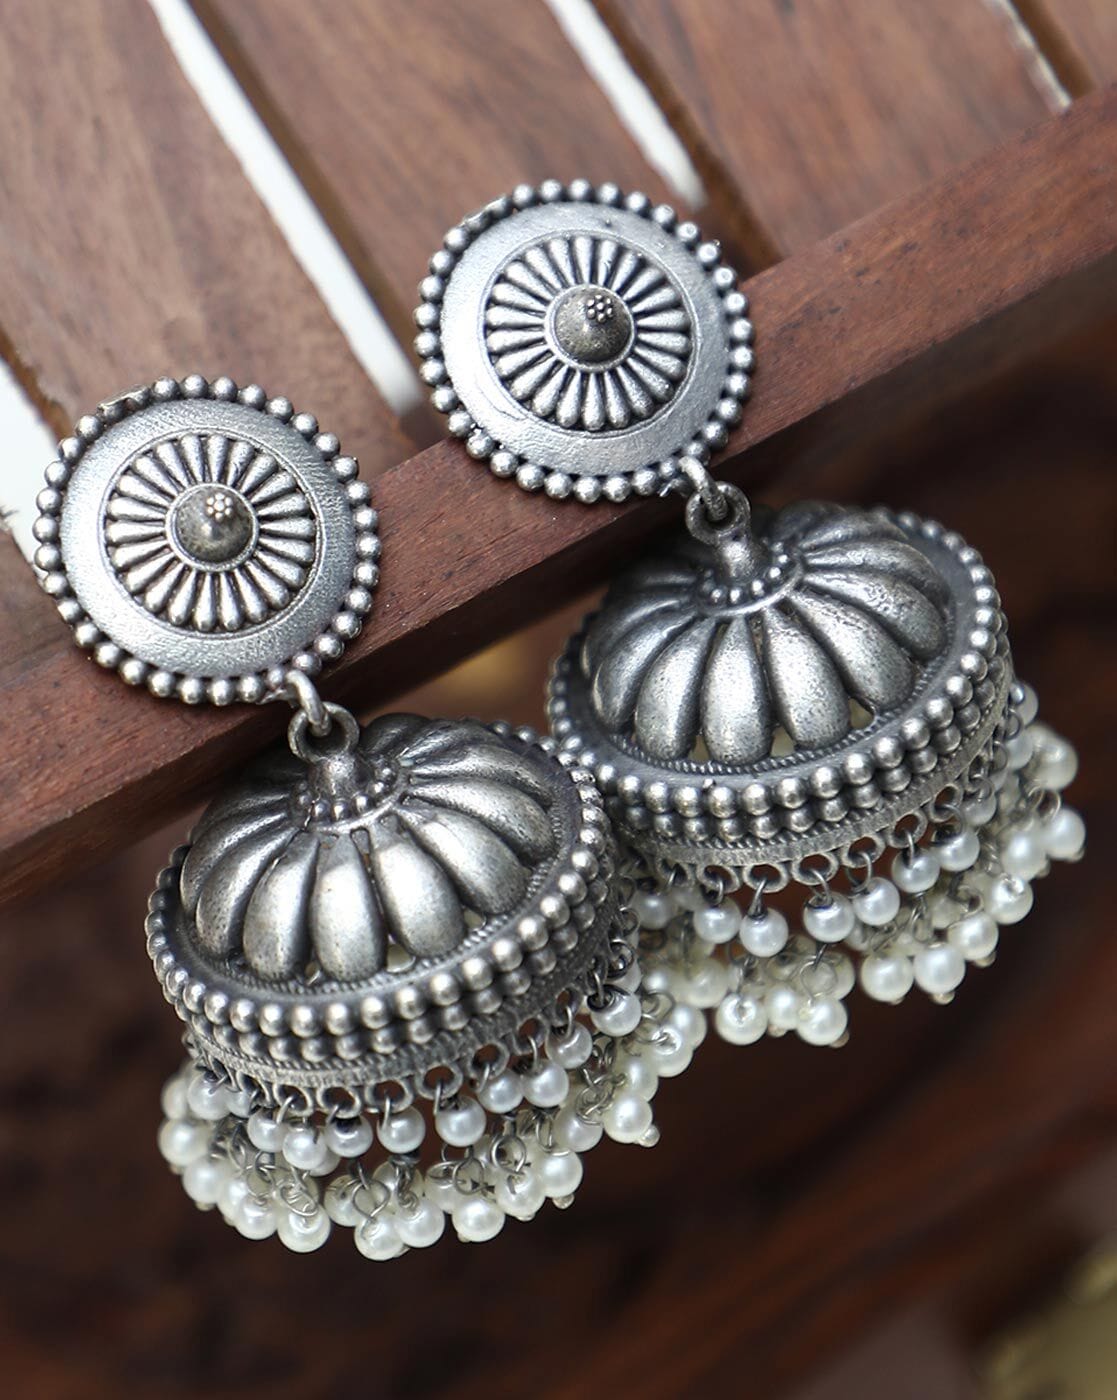 Small Silver Colour Jhumka Earrings - RStore-sgquangbinhtourist.com.vn